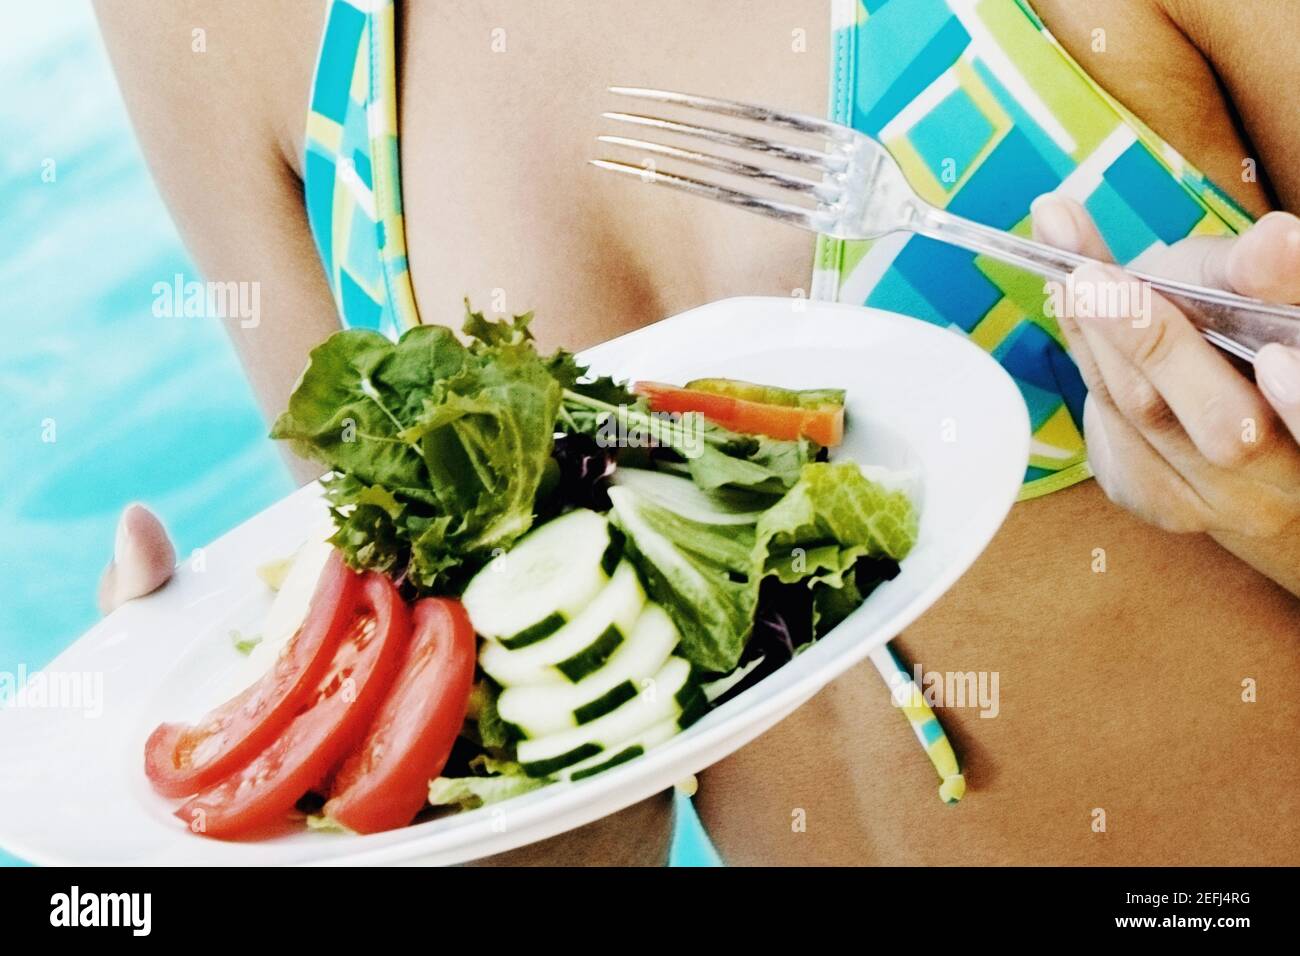 Mid section view of a woman holding a plate of vegetable salad and fork Stock Photo